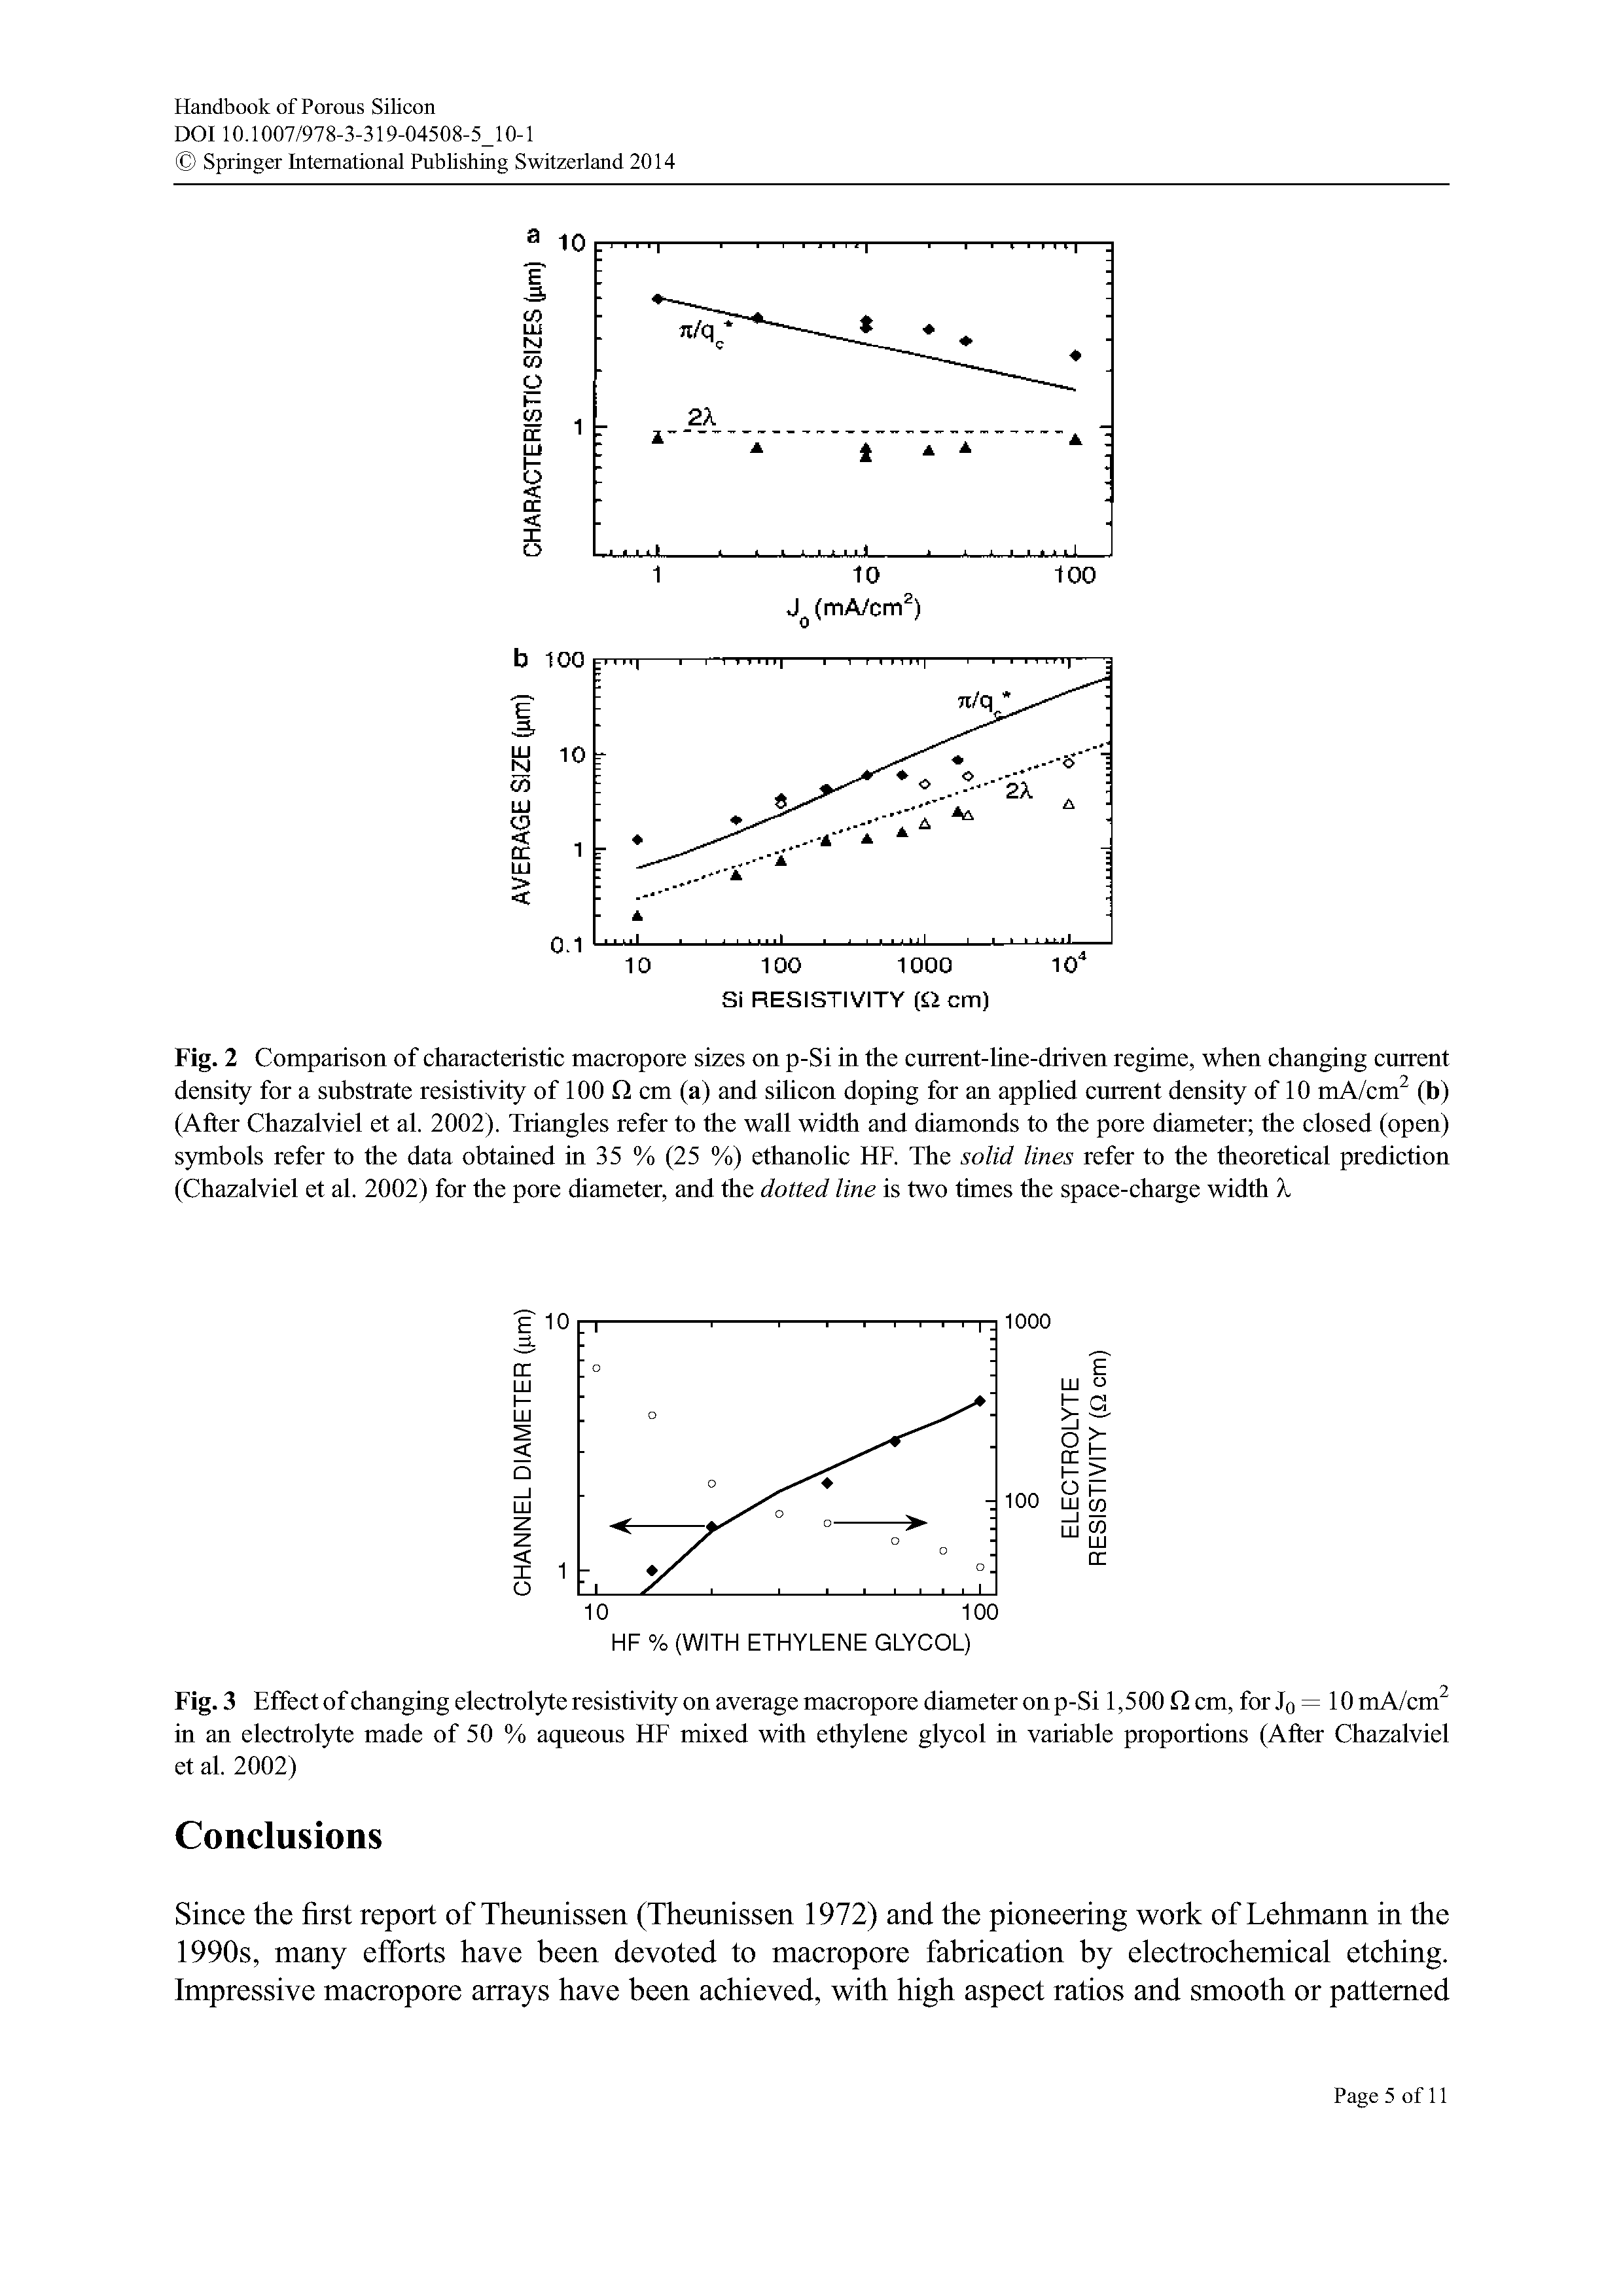 Fig. 2 Comparison of characteristic macropore sizes on p-Si in the current-line-driven regime, when changing current density for a substrate resistivity of 100 Q cm (a) and silicon doping for an applied current density of 10 rtiA/cm (b) (After Chazalviel et al. 2002). Triangles refer to the wall width and diamonds to the pore diameter the closed (open) symbols refer to the data obtained in 35 % (25 %) ethanolic HR The solid lines refer to the theoretical prediction (Chazalviel et al. 2002) for the pore diameter, and the dotted line is two times the space-charge width X...